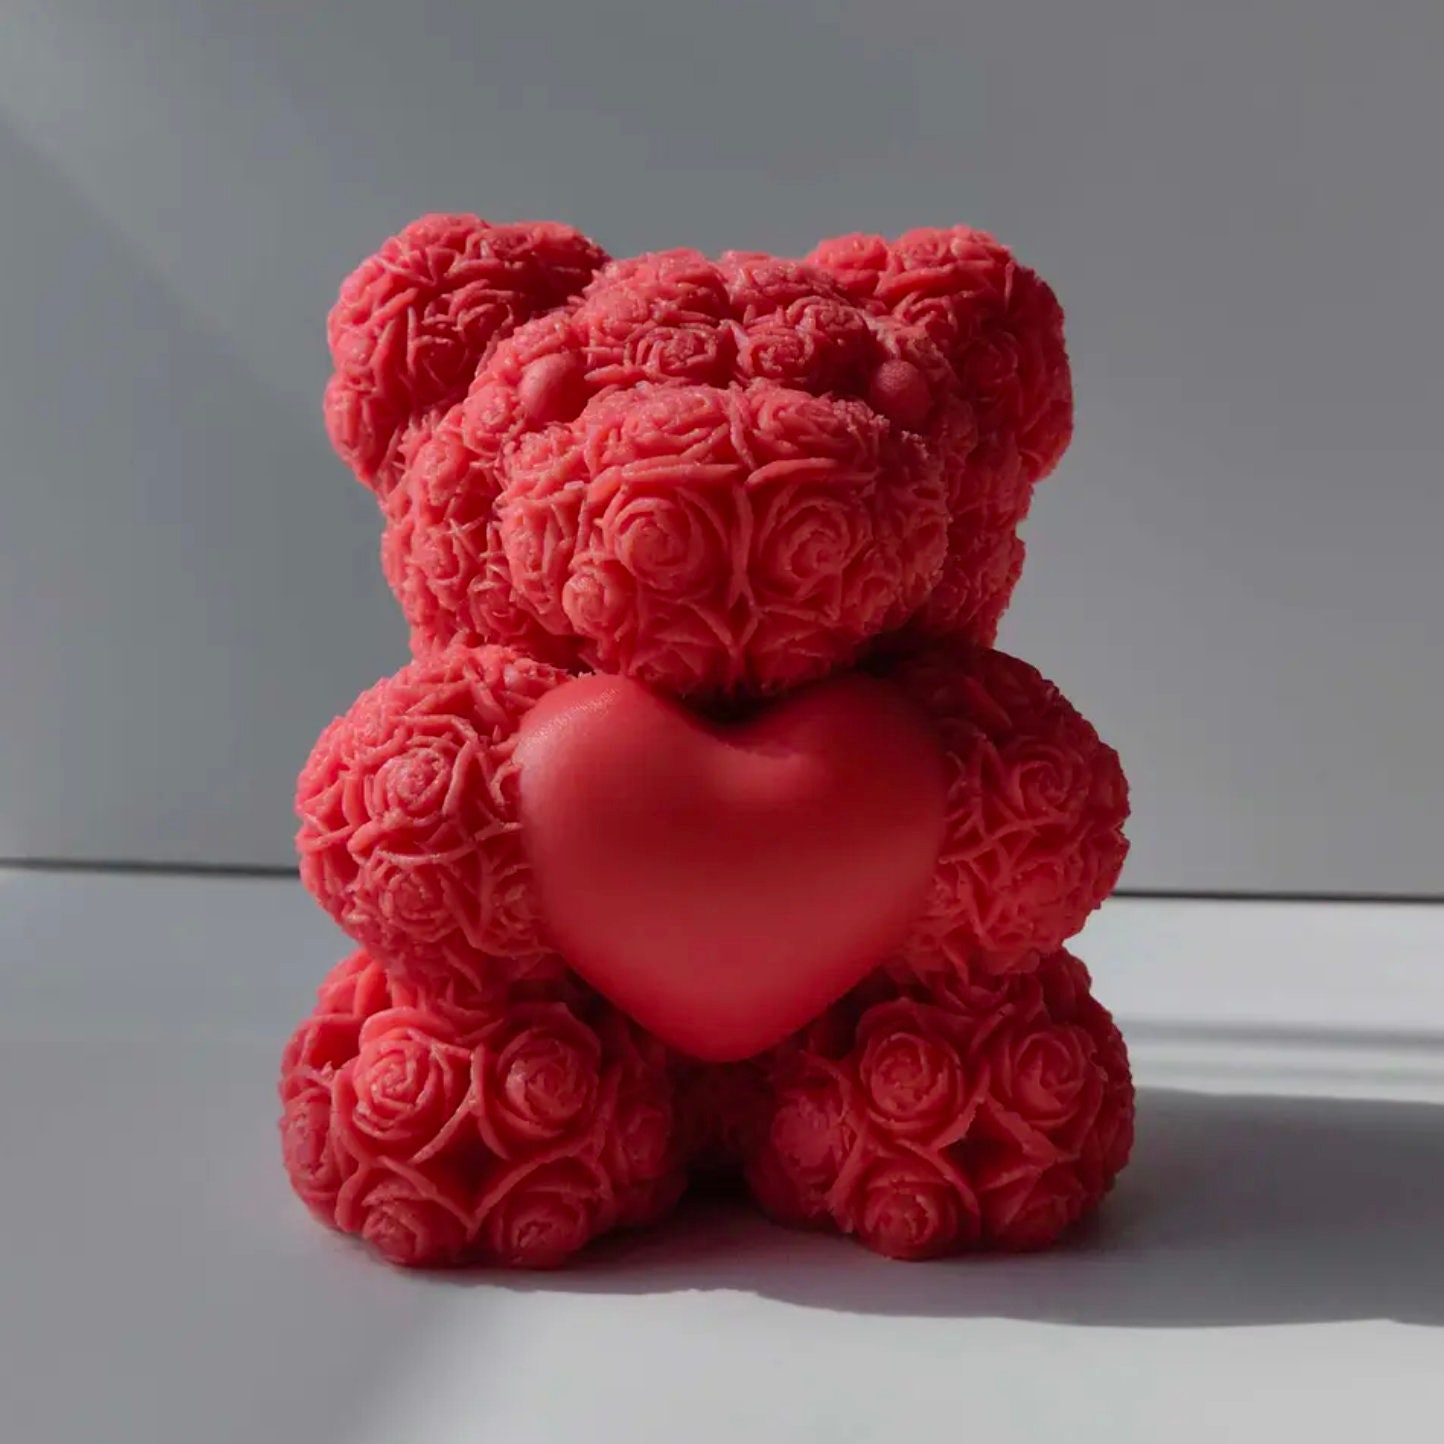 Siliconify Rose Bear Candle Mold DIY Heart Bouquet Shape For Romantic  Flower Candles, Perfect For Valentines Day Gifts! From Cong09, $10.28